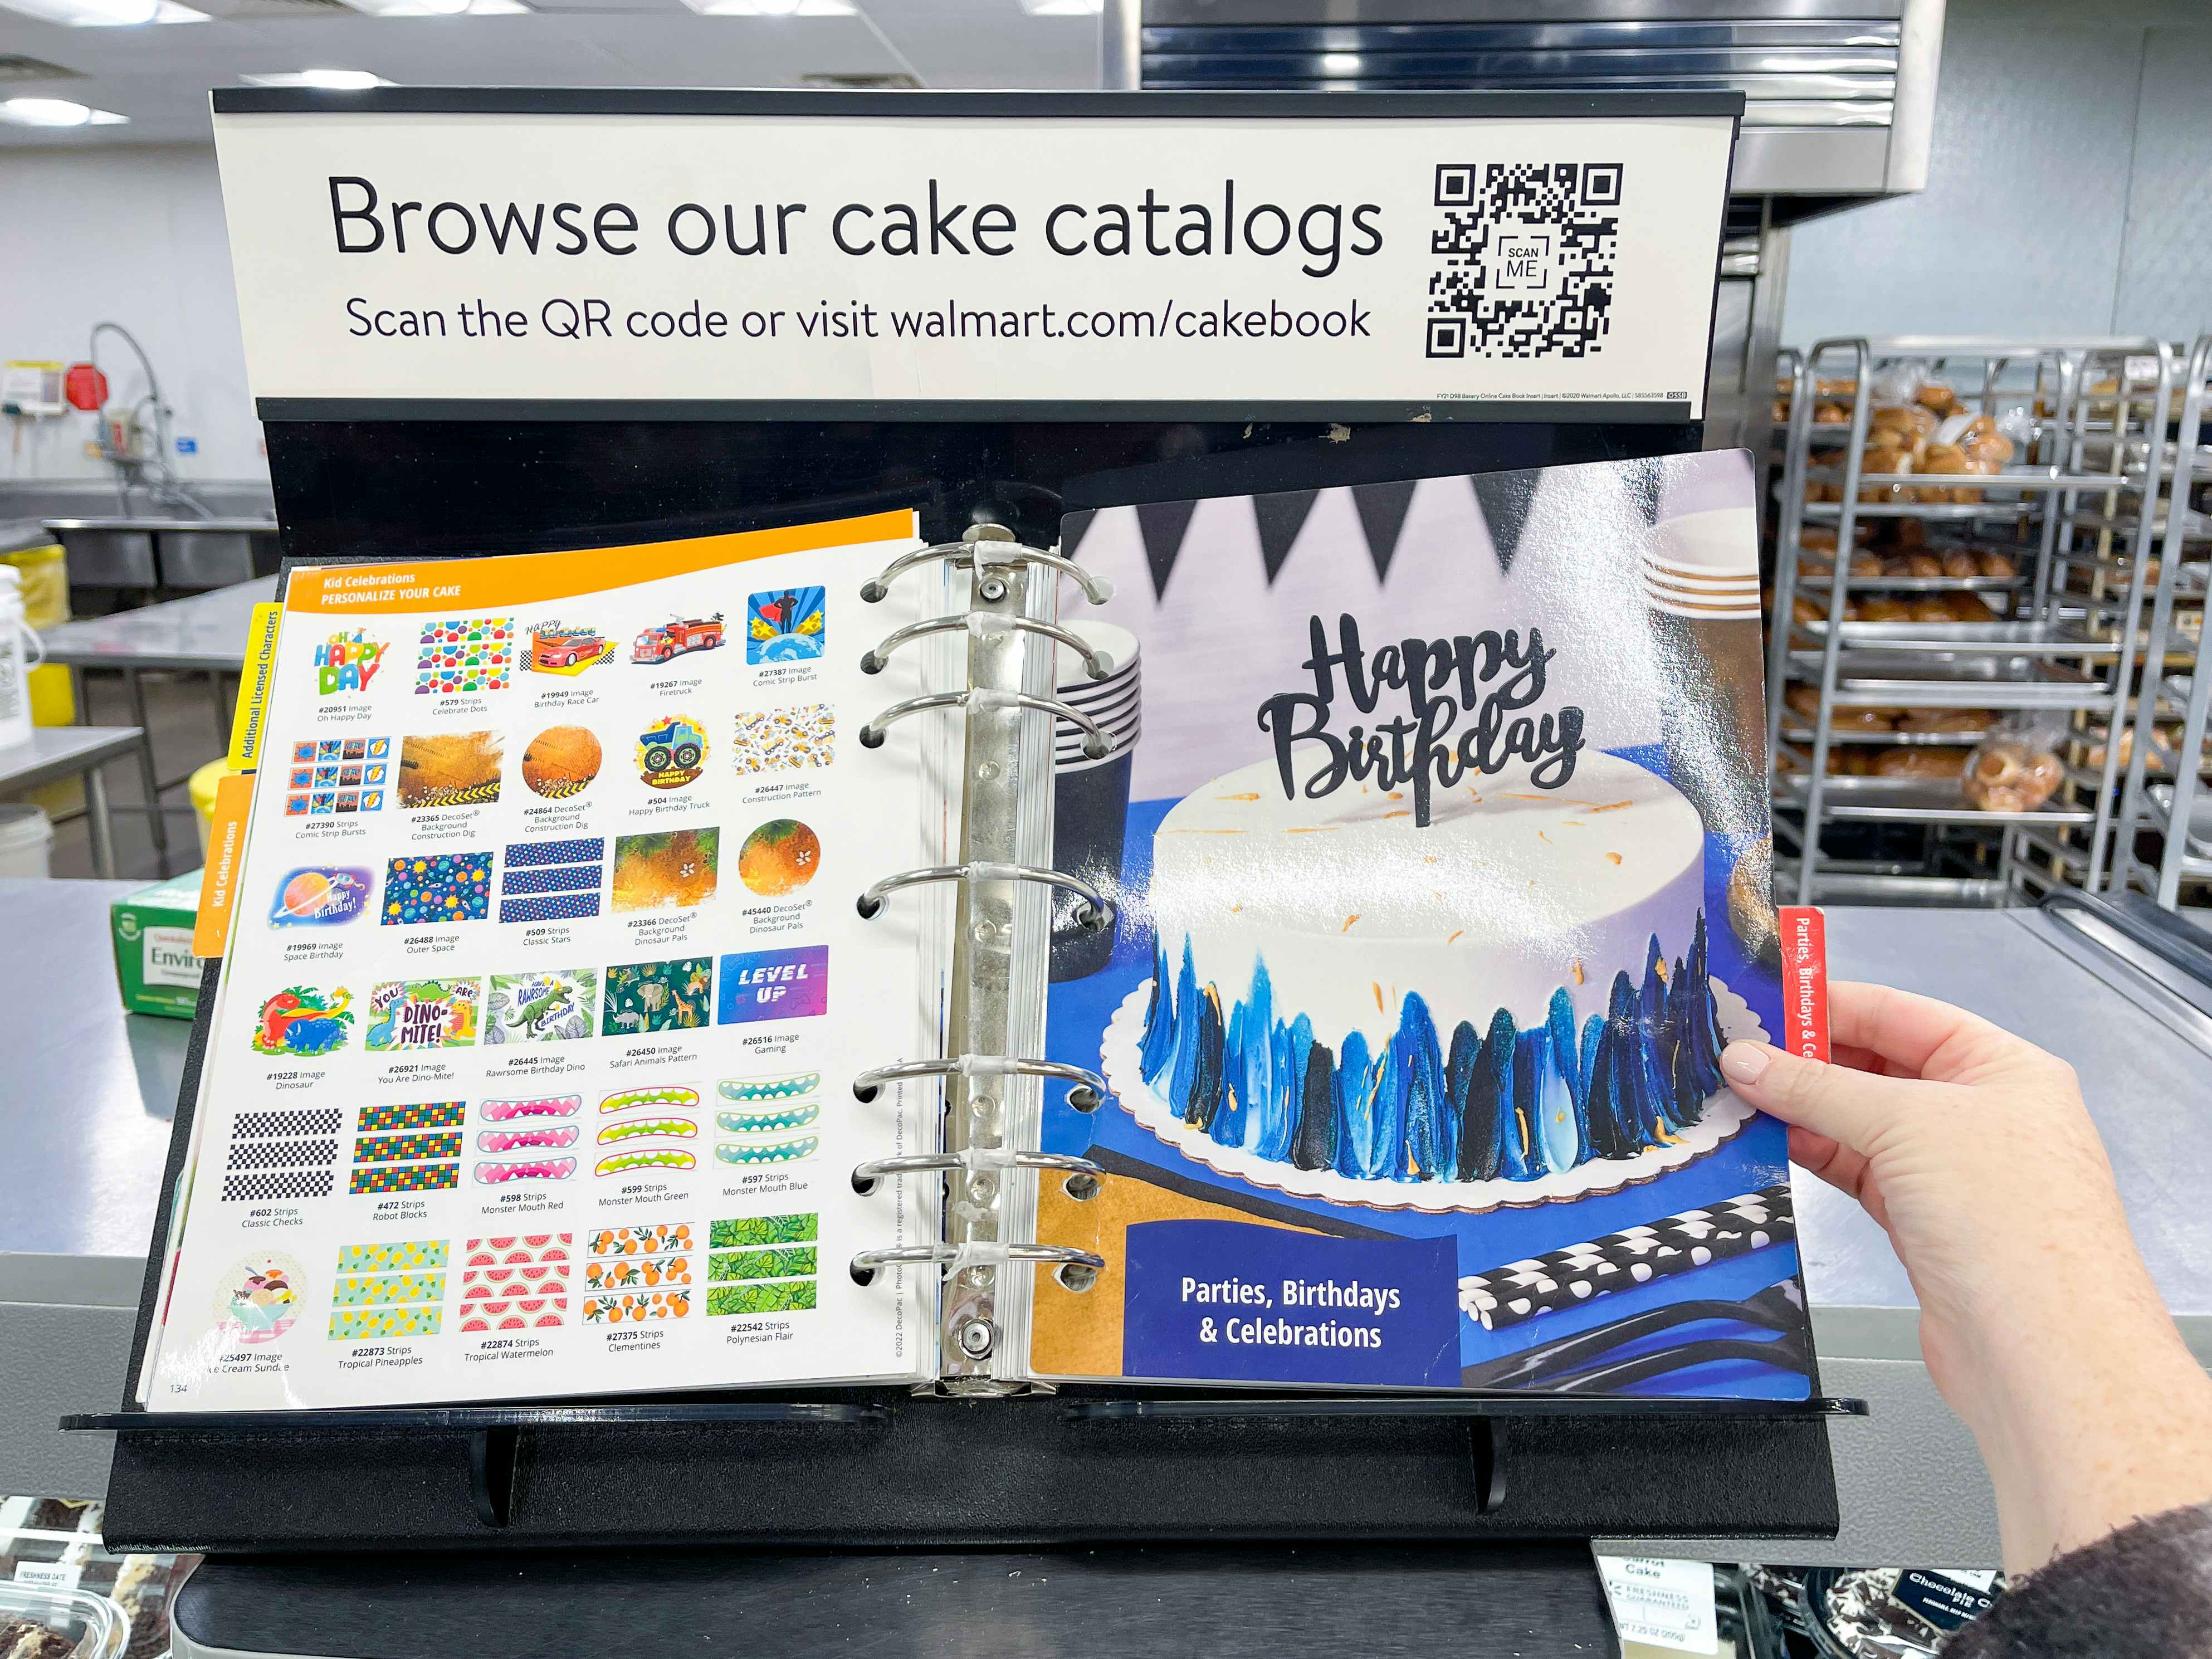 The custom cake catalog book on the counter in the Walmart bakery